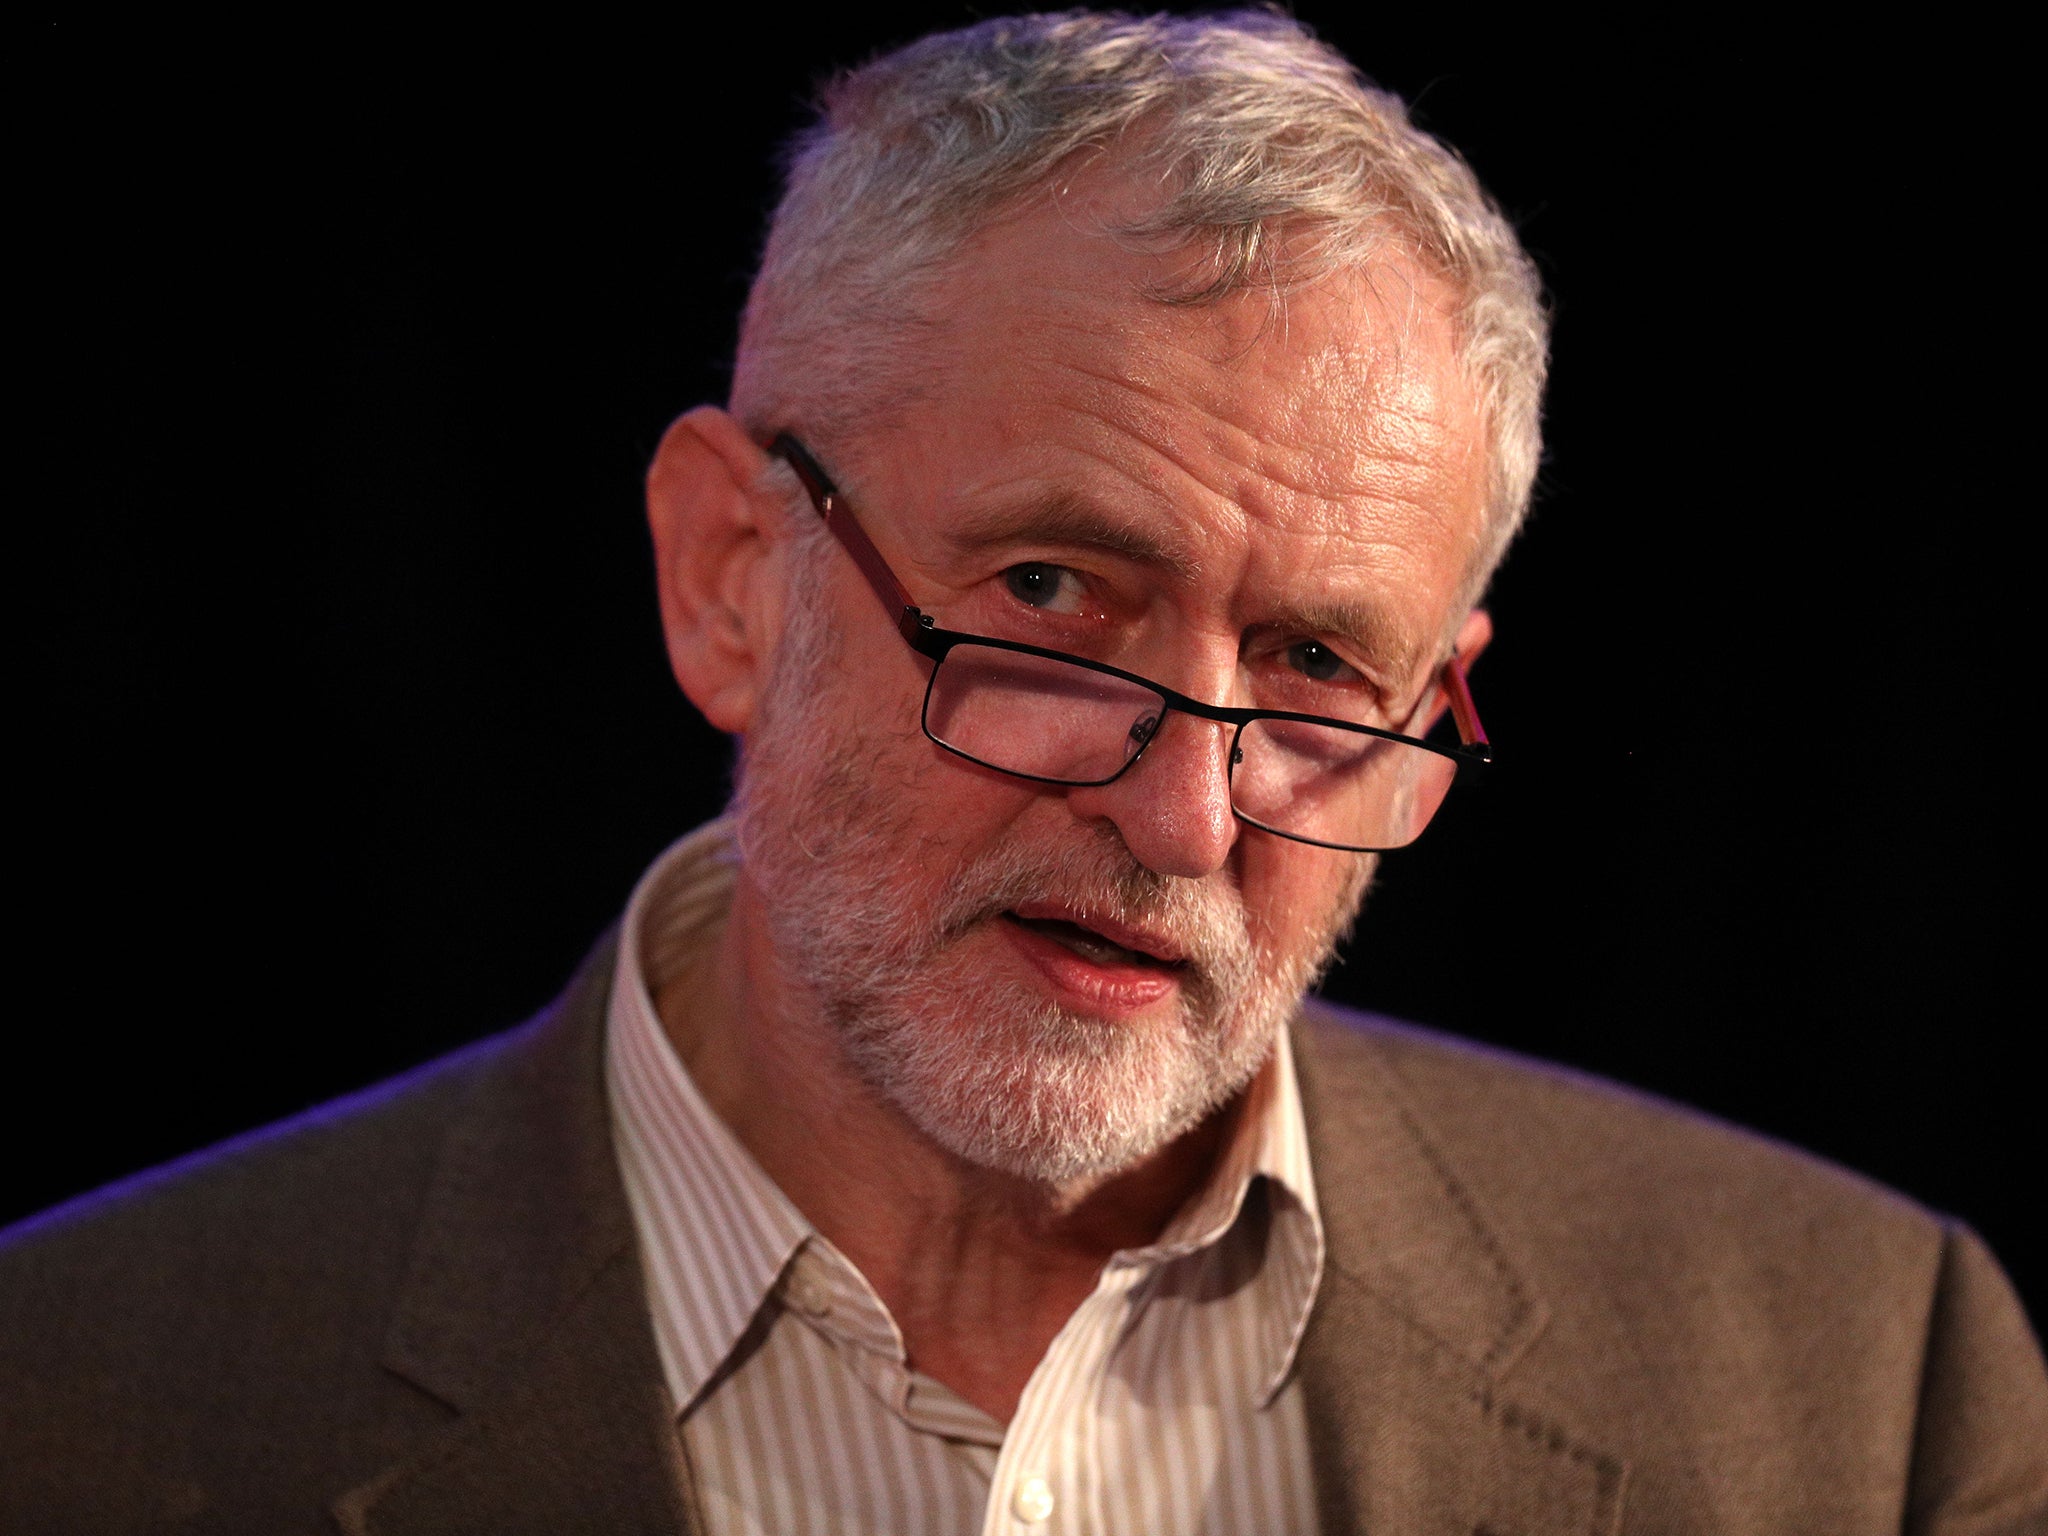 The Labour leader has proposed an urgent meeting to discuss emergency support for social care